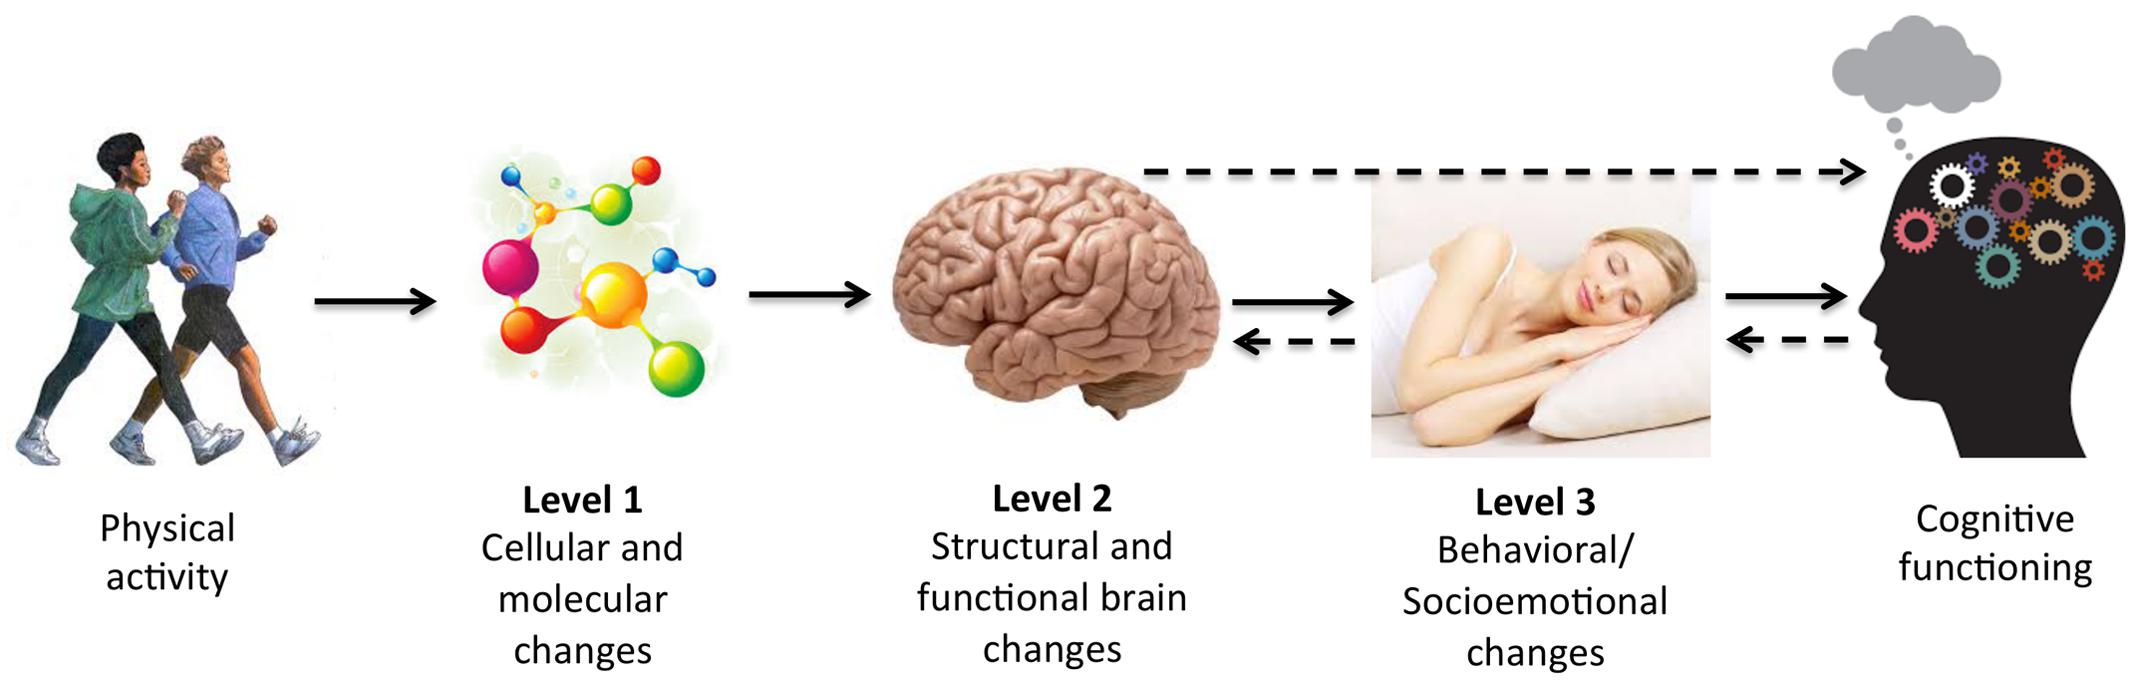 Exercise & Cognitive Function Active by GS